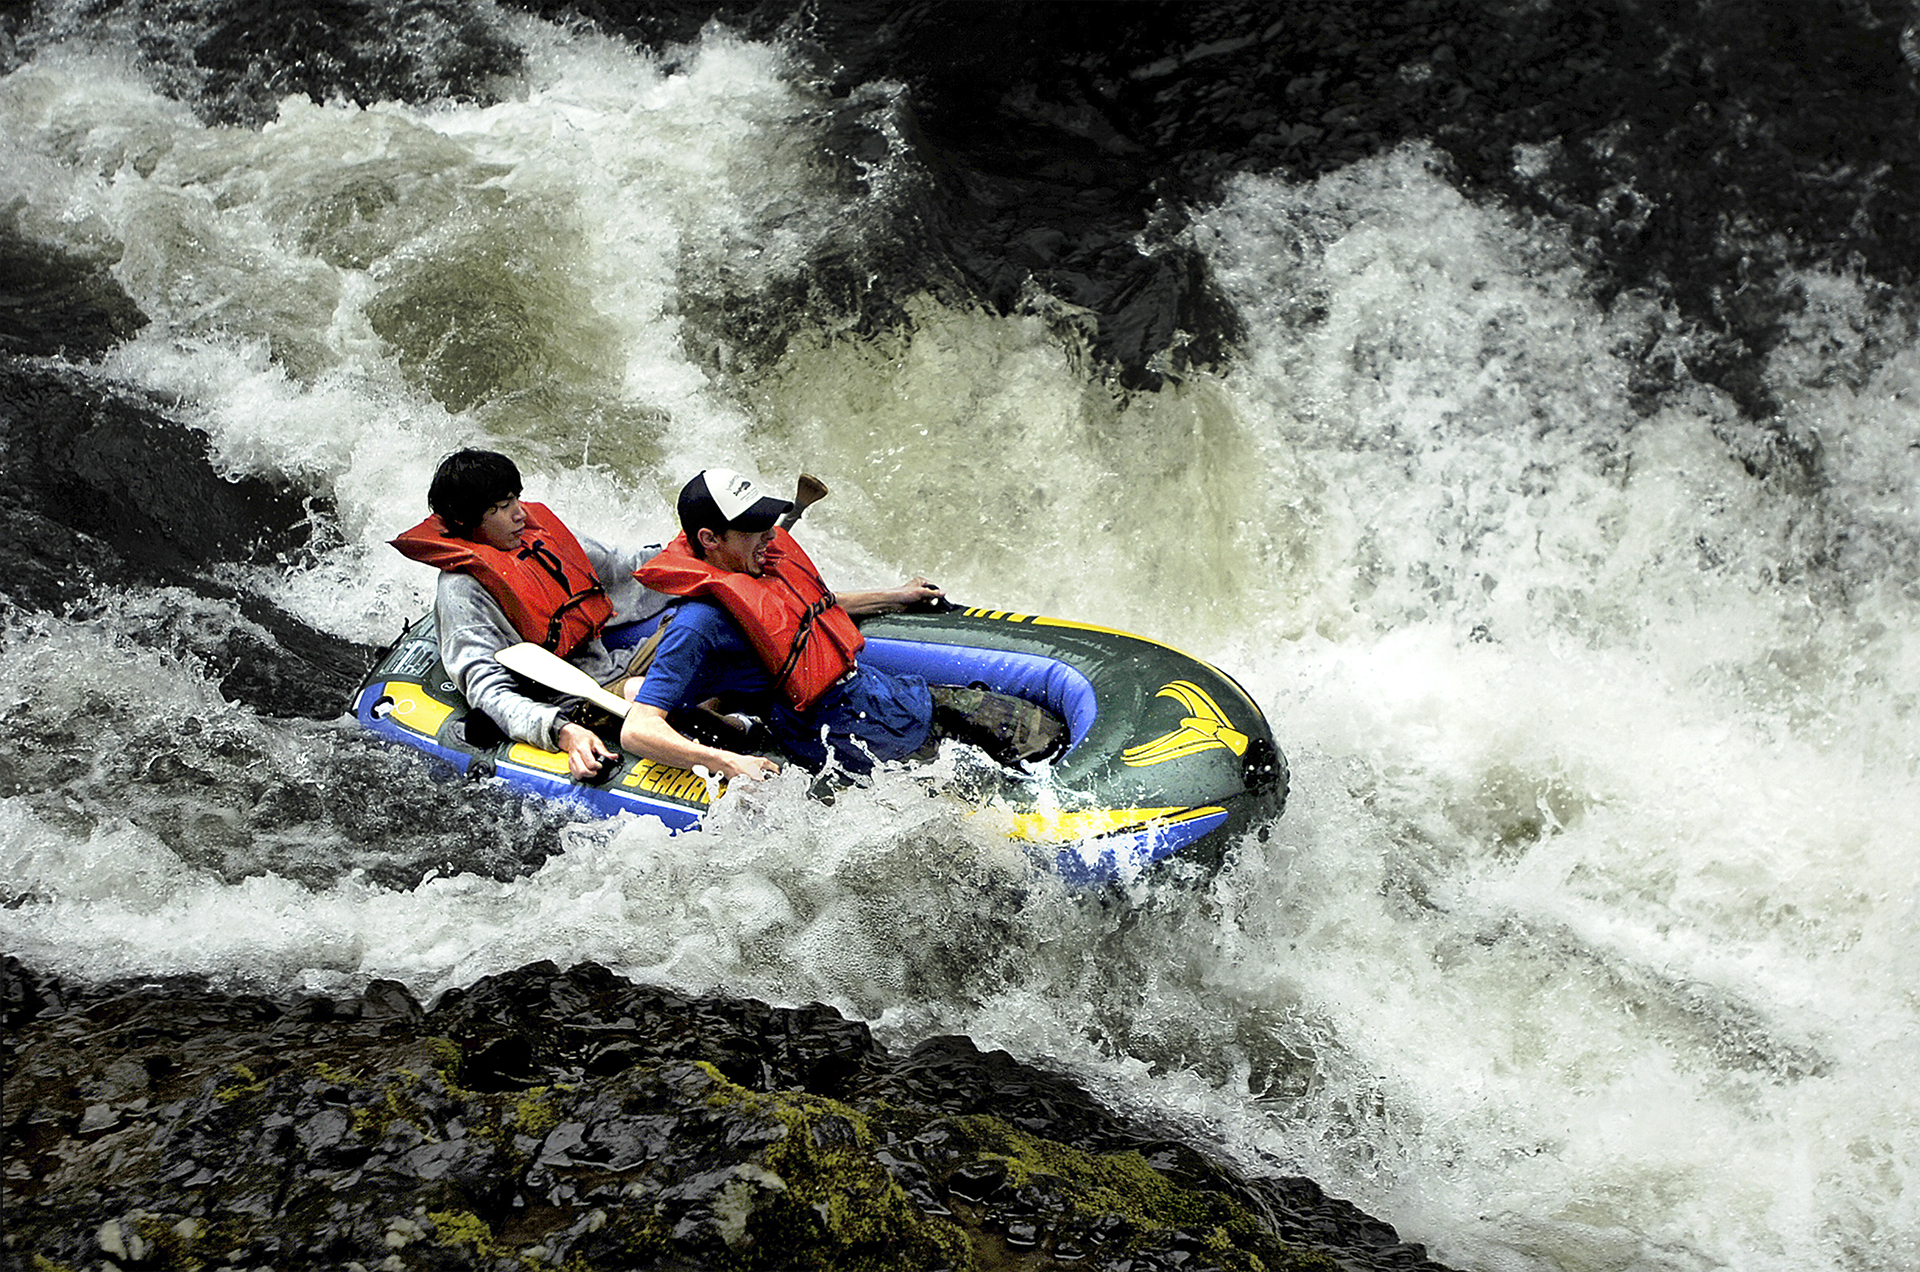 The river offers whitewater rafting.